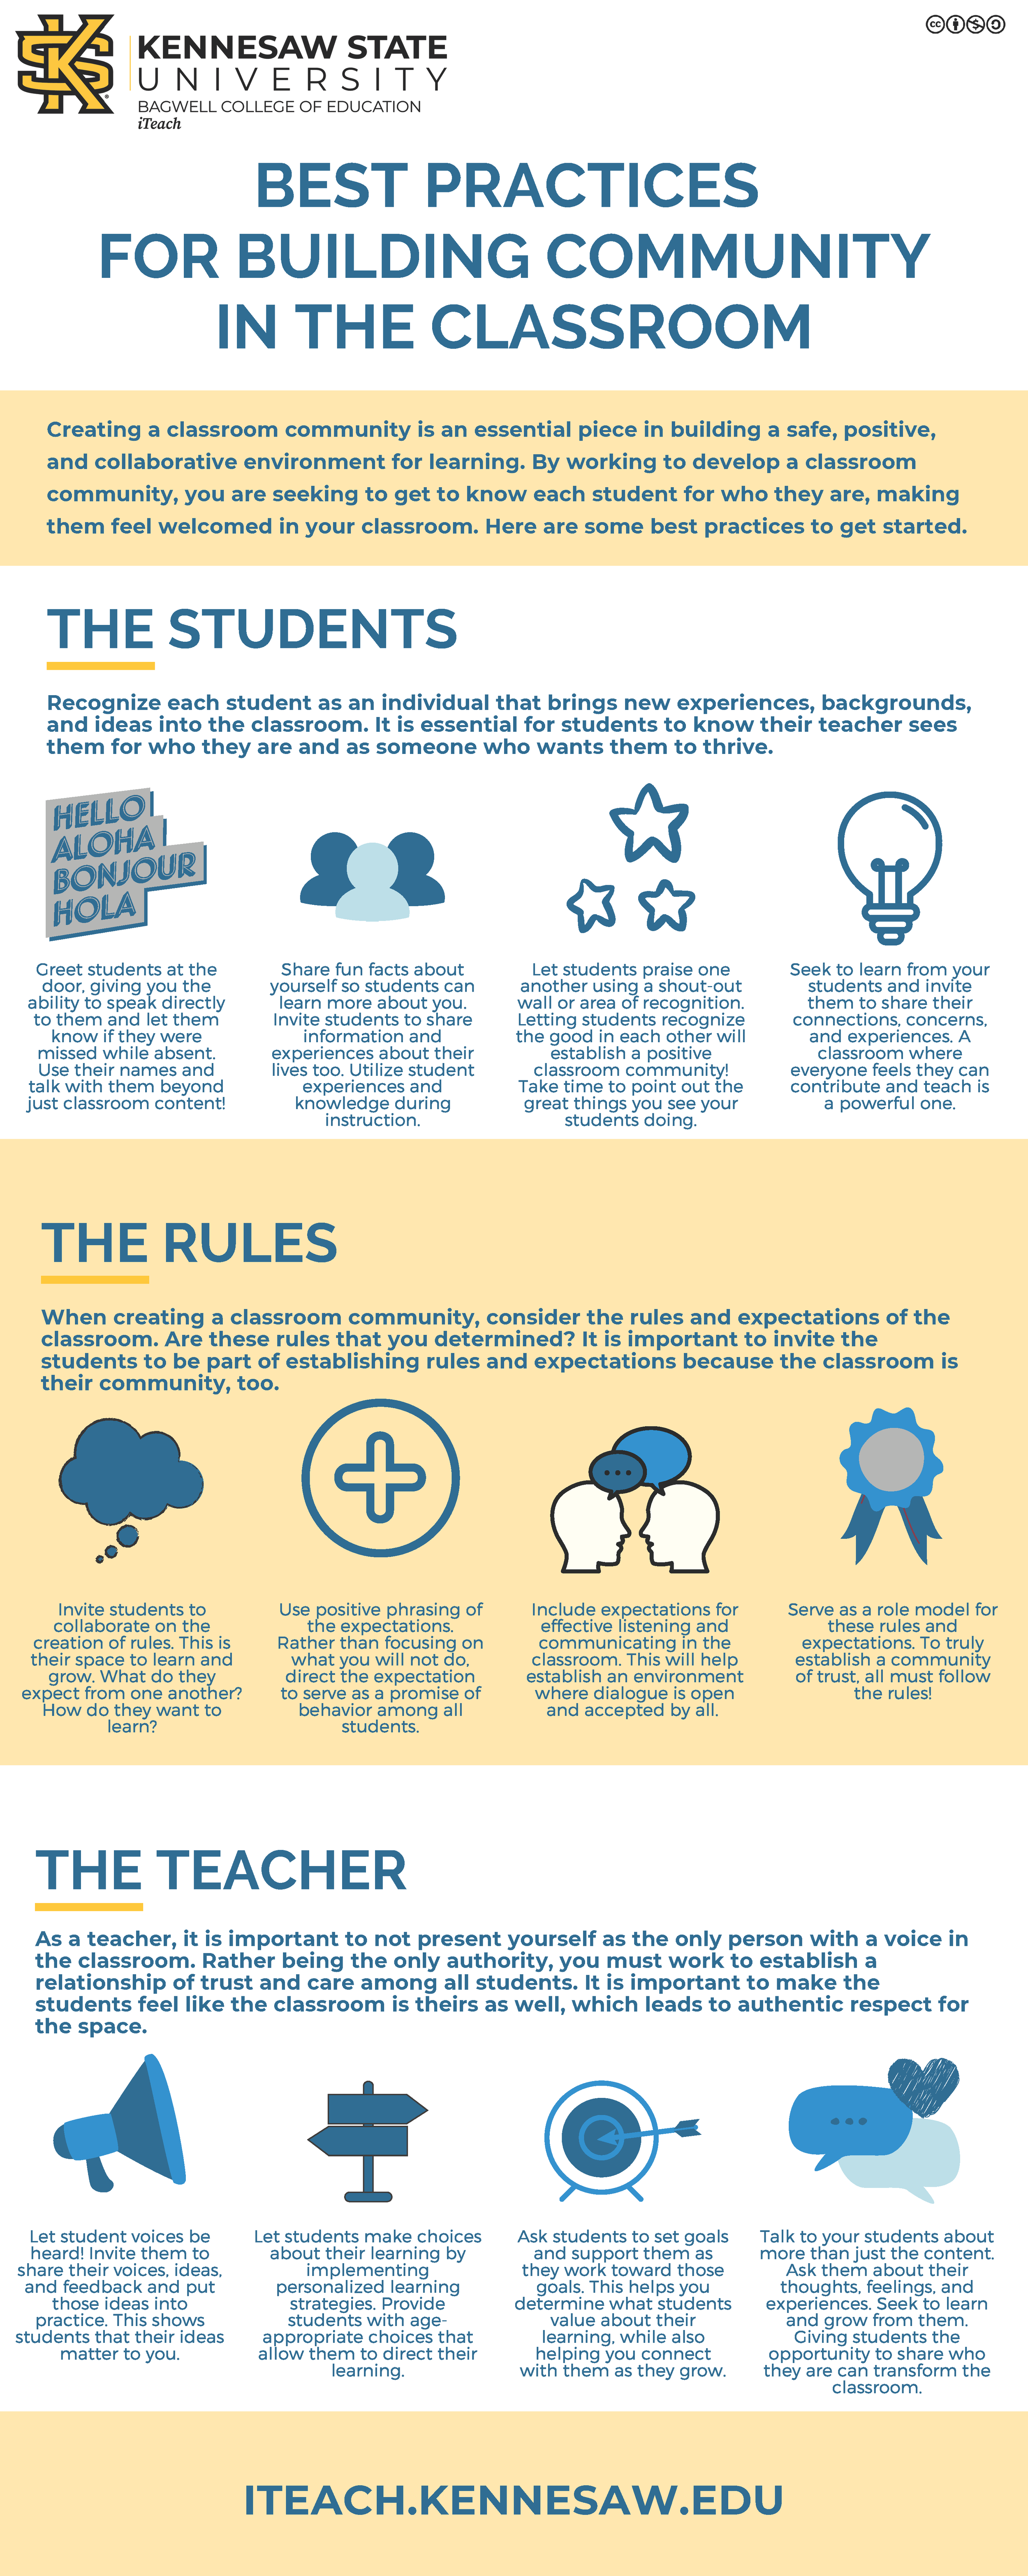 Best Practices for Creating a Classroom Community.png